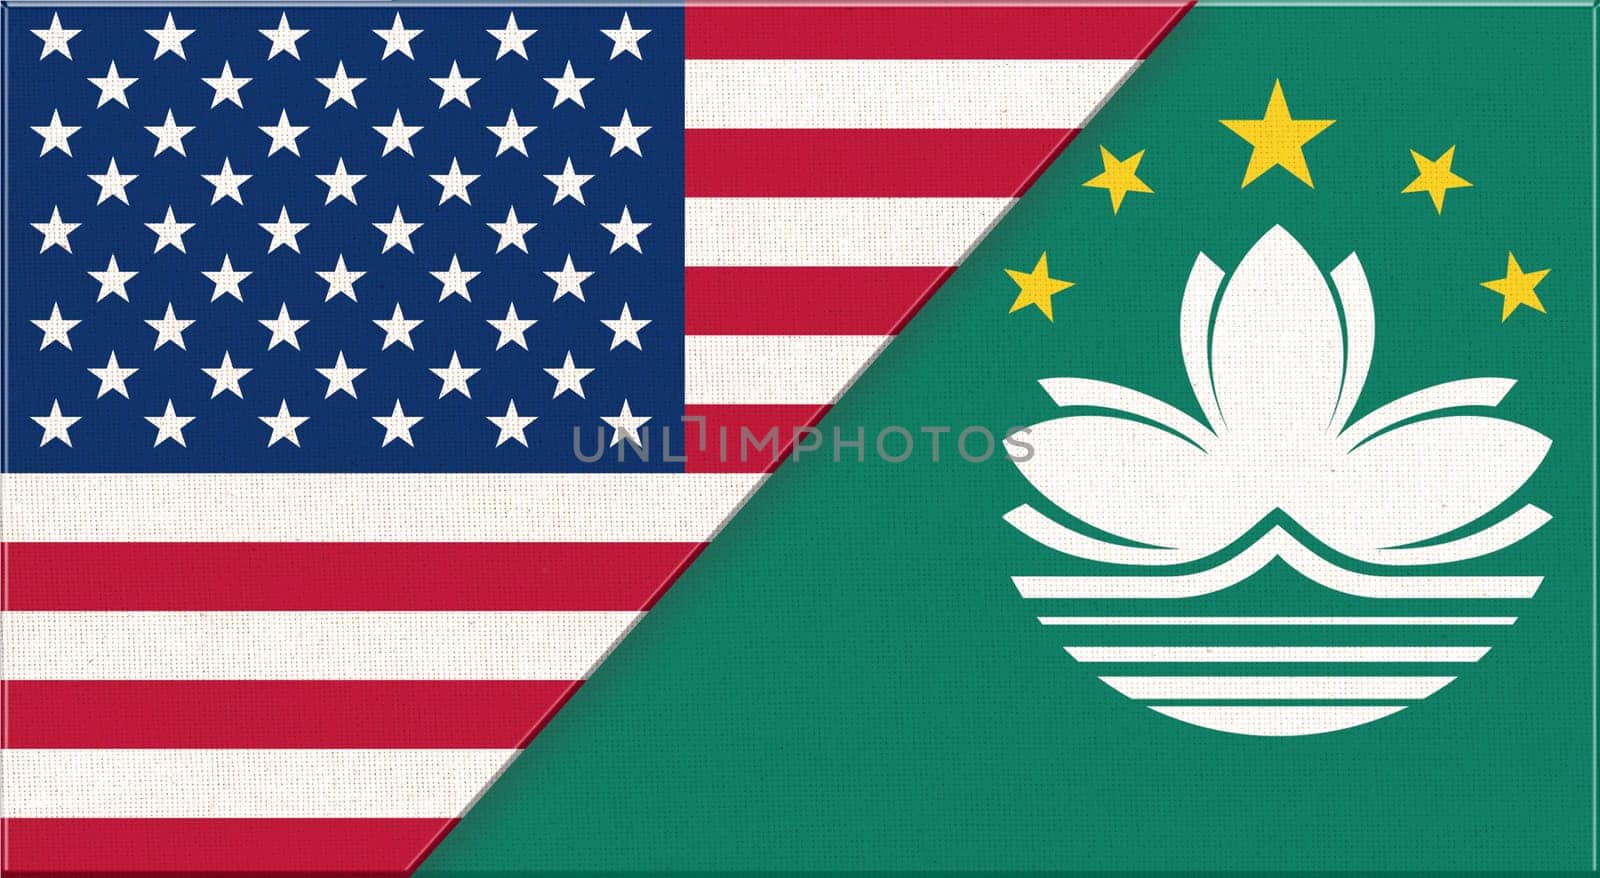 Flags of USA and Macao. American and Macau national flags on fabric surface. Flag of USA and Macao - 3D illustration. Two Flag Together - Fabric Texture